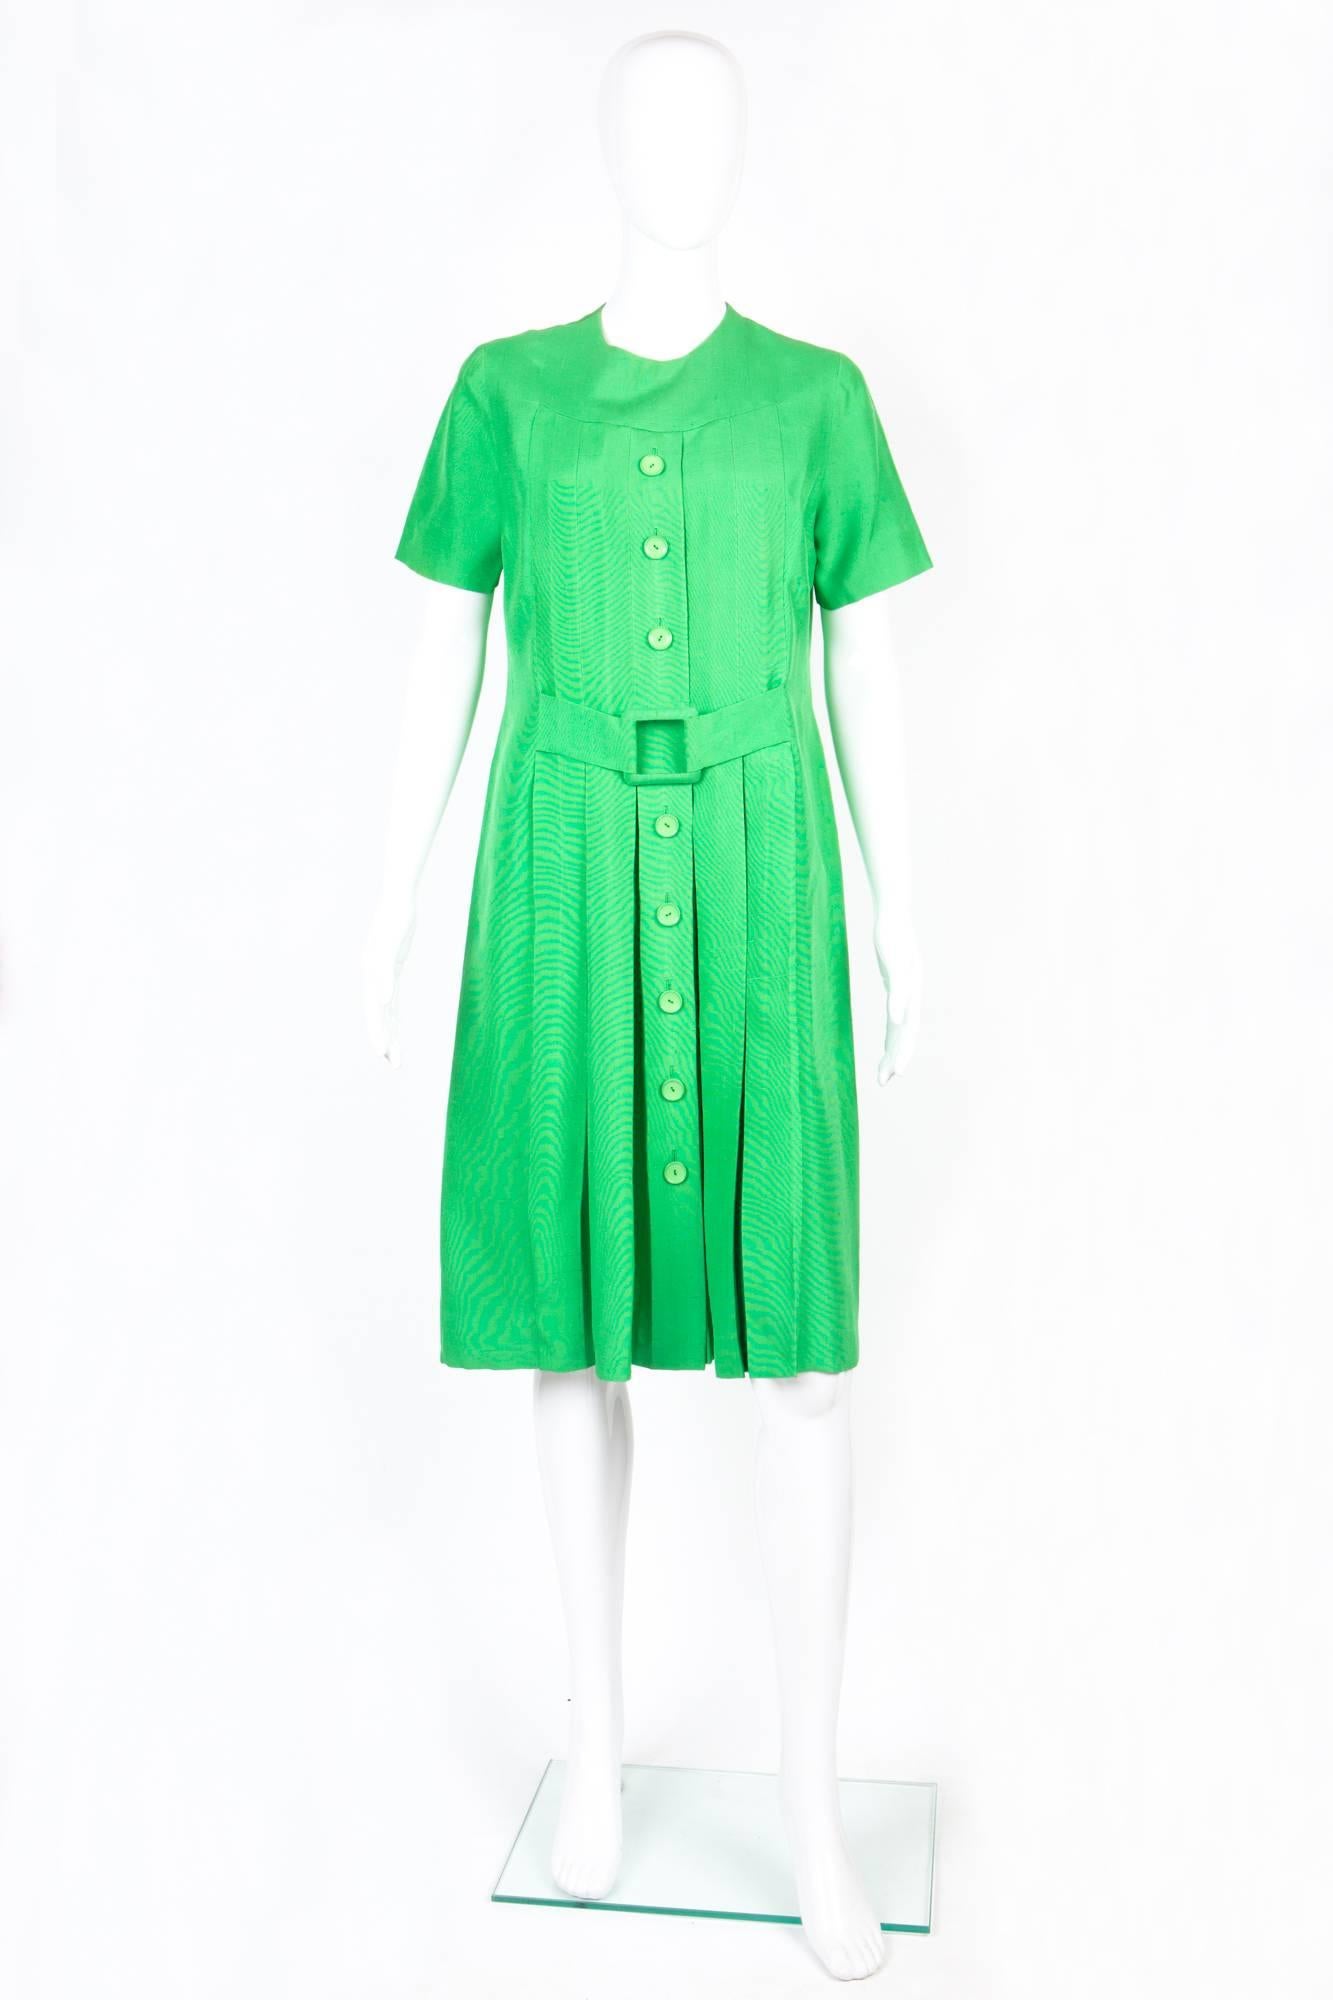 Rare 1960s Molyneux green silk handmade dress featuring  a center back zip opening, short sleeves, decorative front buttons & front decorative belt.
In good vintage condition. Made in France.
We guarantee you will receive this rare dress as